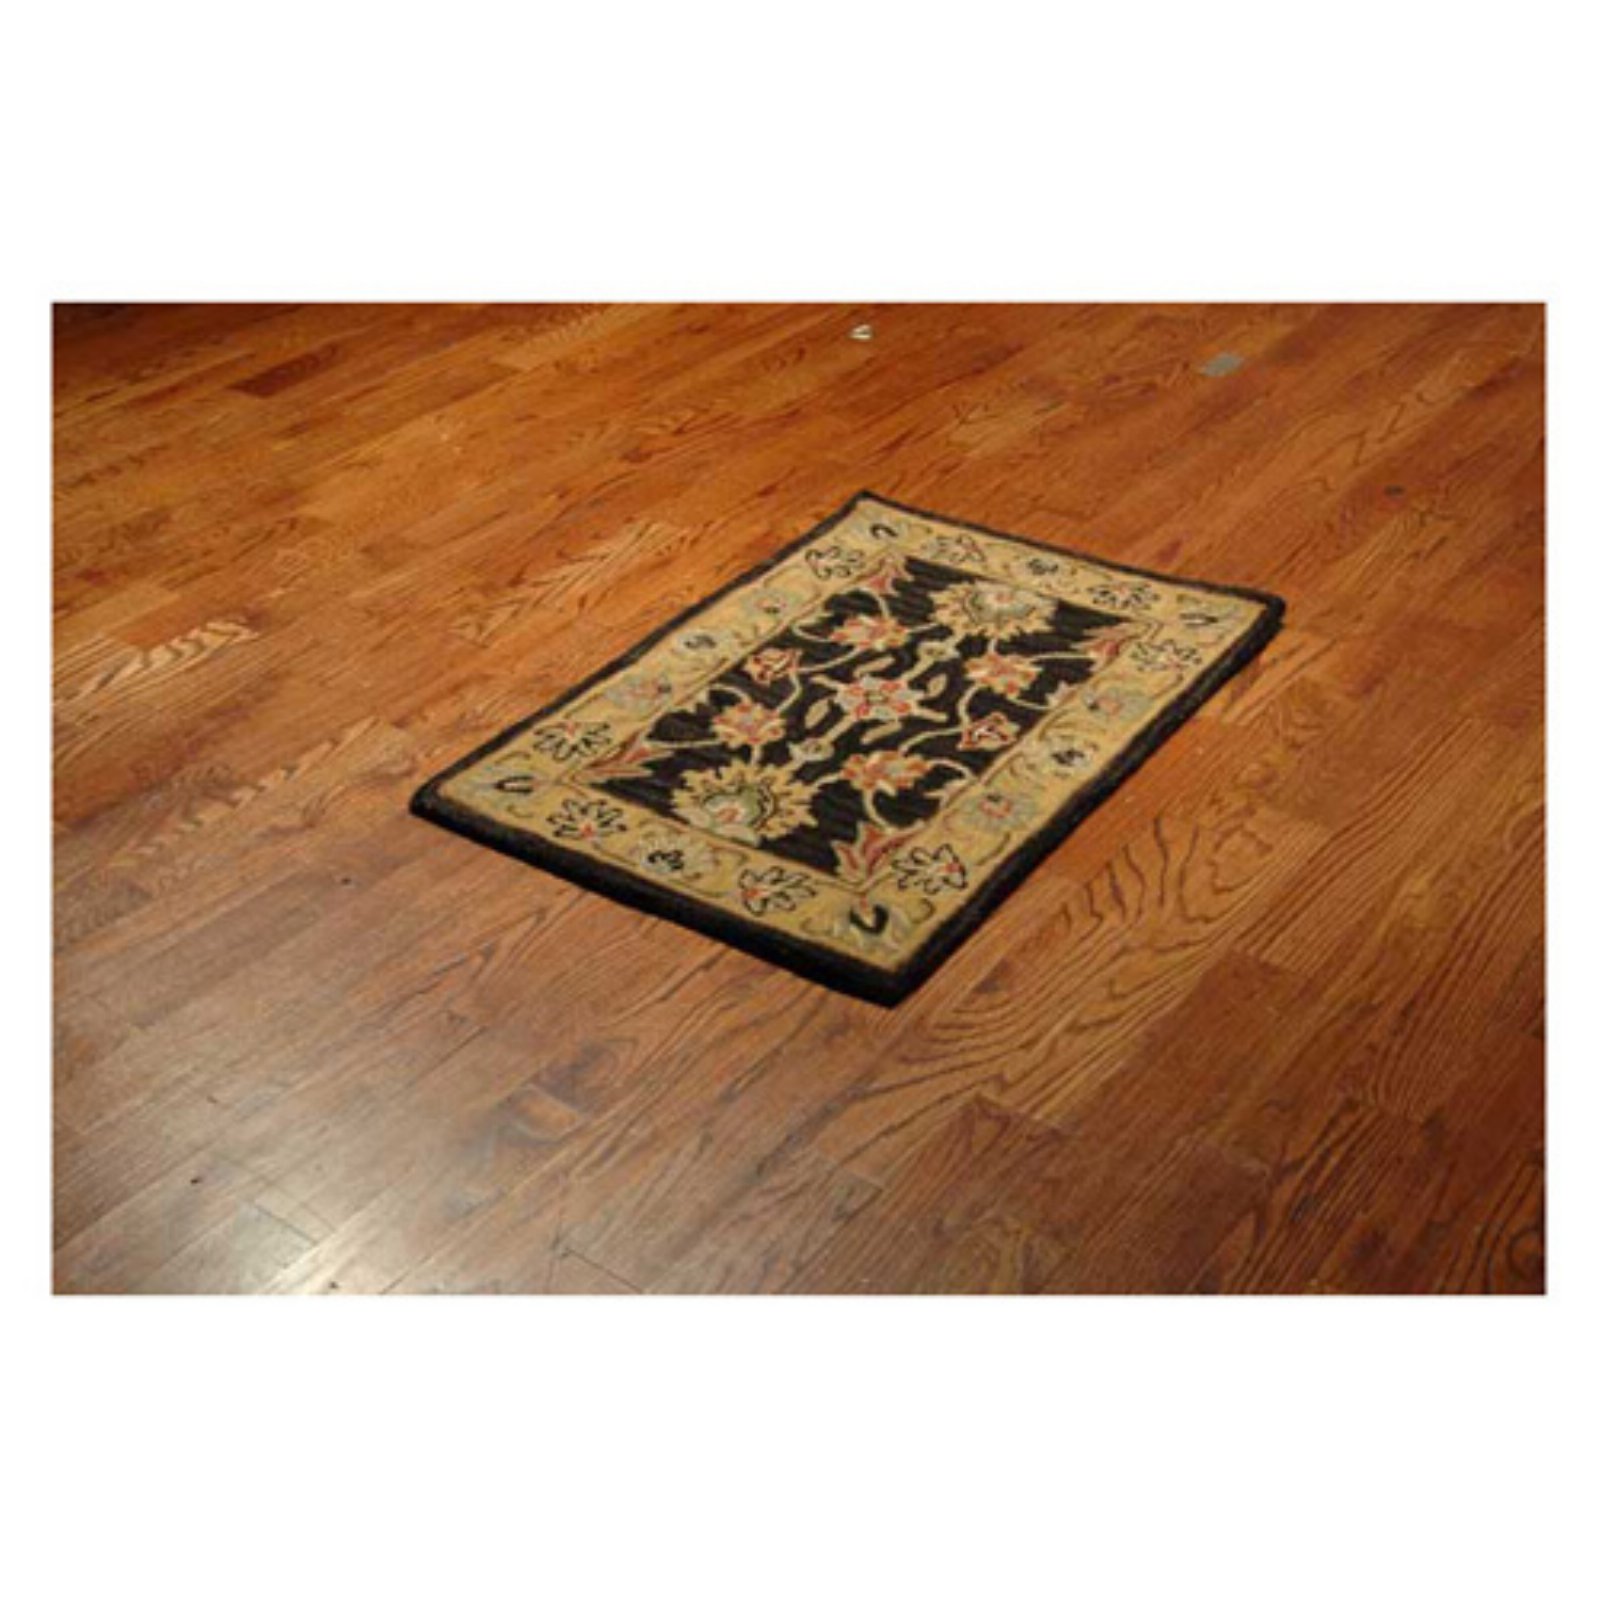 SAFAVIEH Heritage Regis Traditional Wool Area Rug, Charcoal/Gold, 9'6" x 13'6" - image 3 of 10